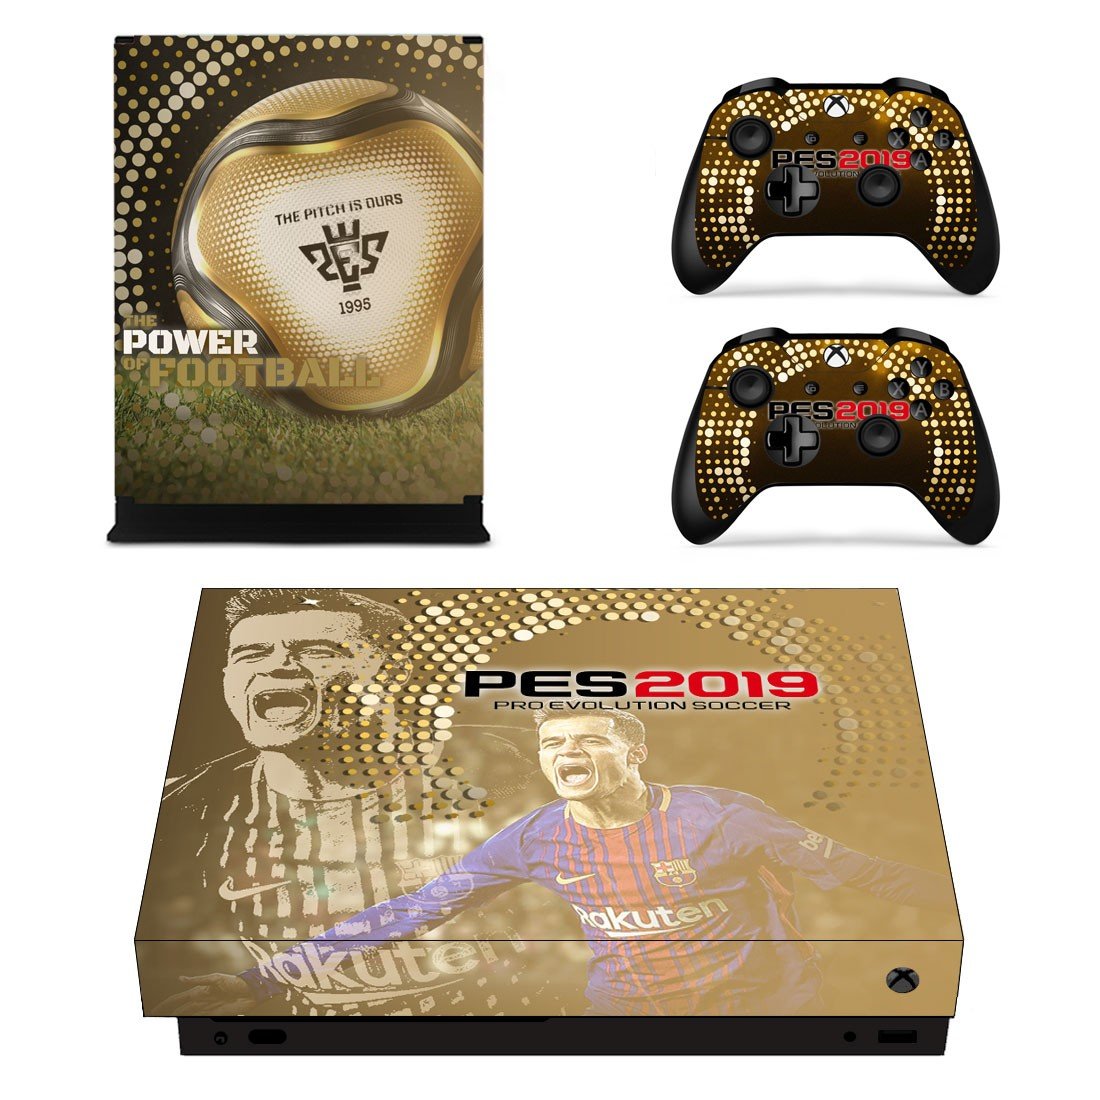 PES 2019 Skin Sticker Decal for Xbox One X Controllers